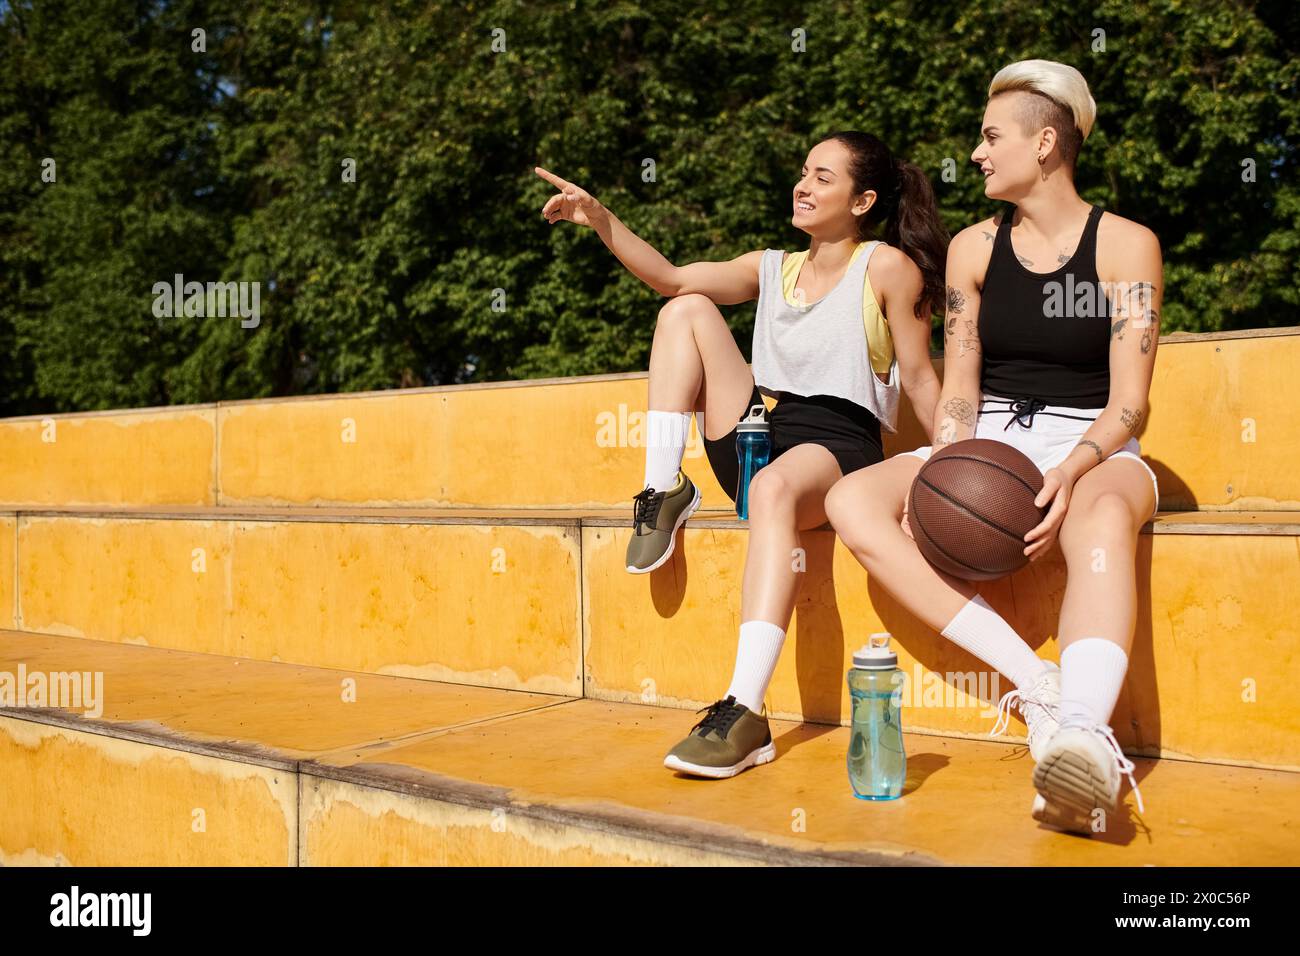 Two young women, athletic friends, sit closely together after playing basketball outdoors on a summer day. Stock Photo